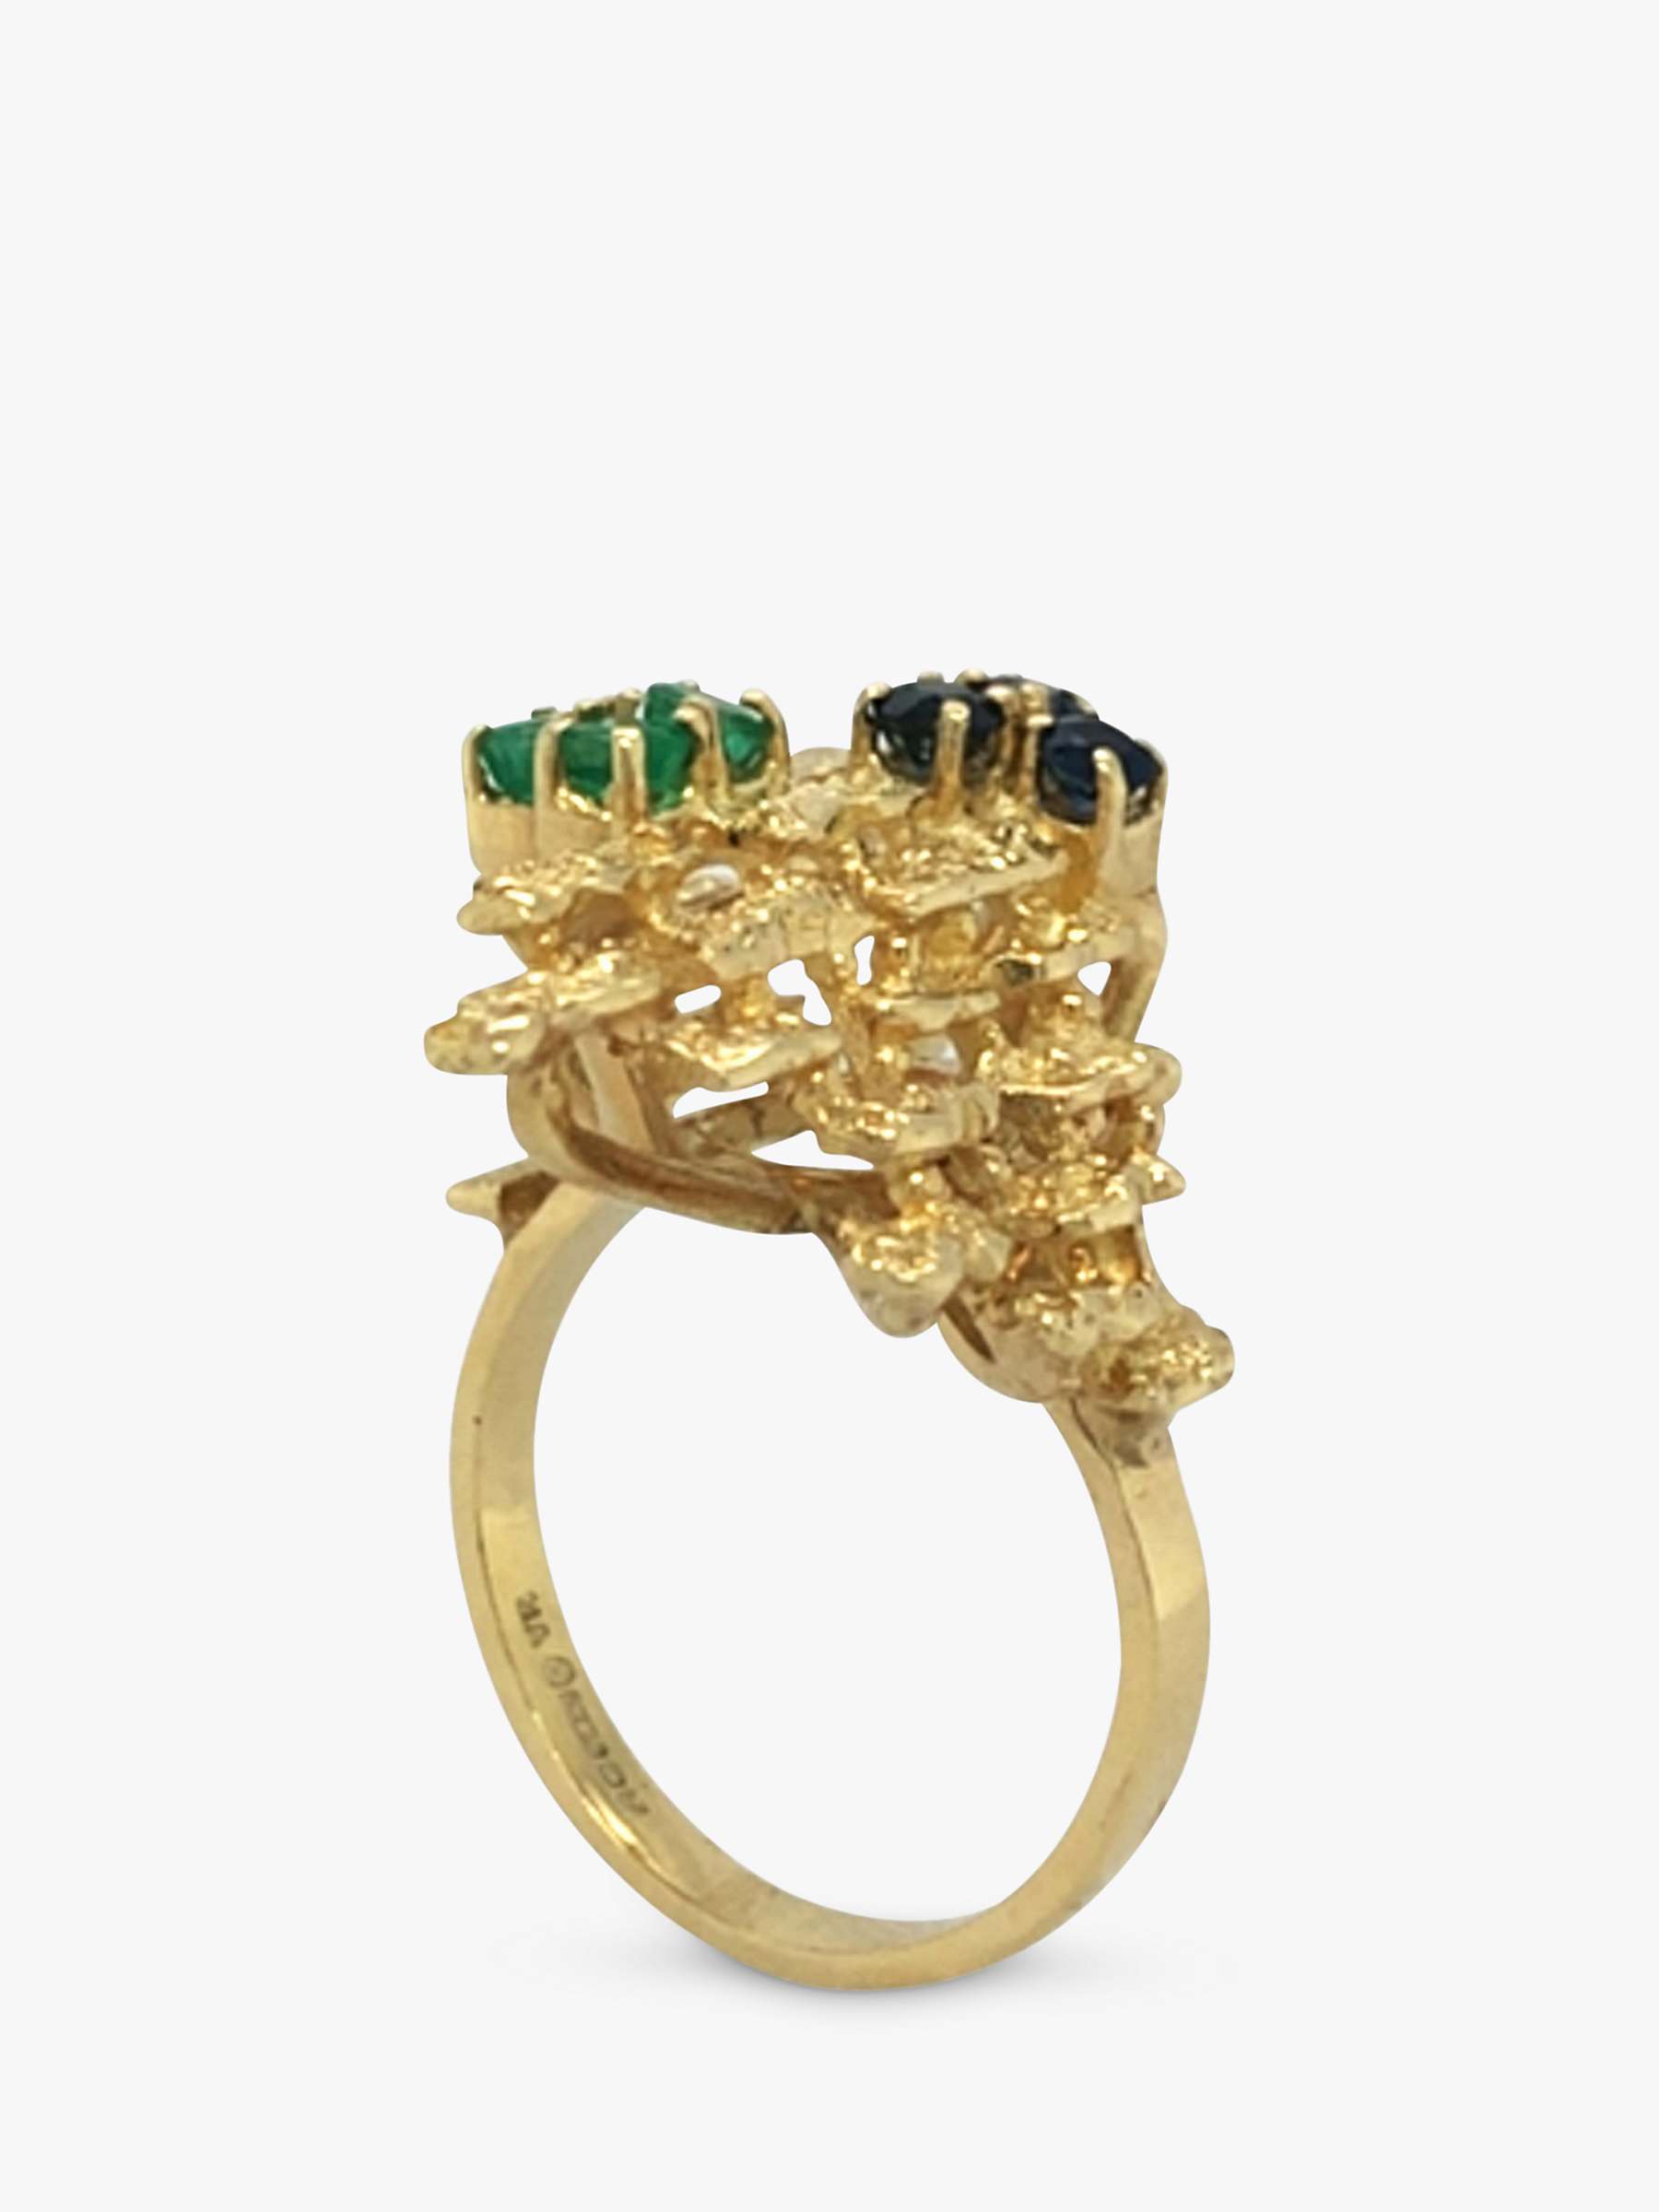 Buy Vintage Fine Jewellery Second Hand 14ct Yellow Gold Sapphire and Emerald Dress Ring, Dated Birmingham 1973 Online at johnlewis.com